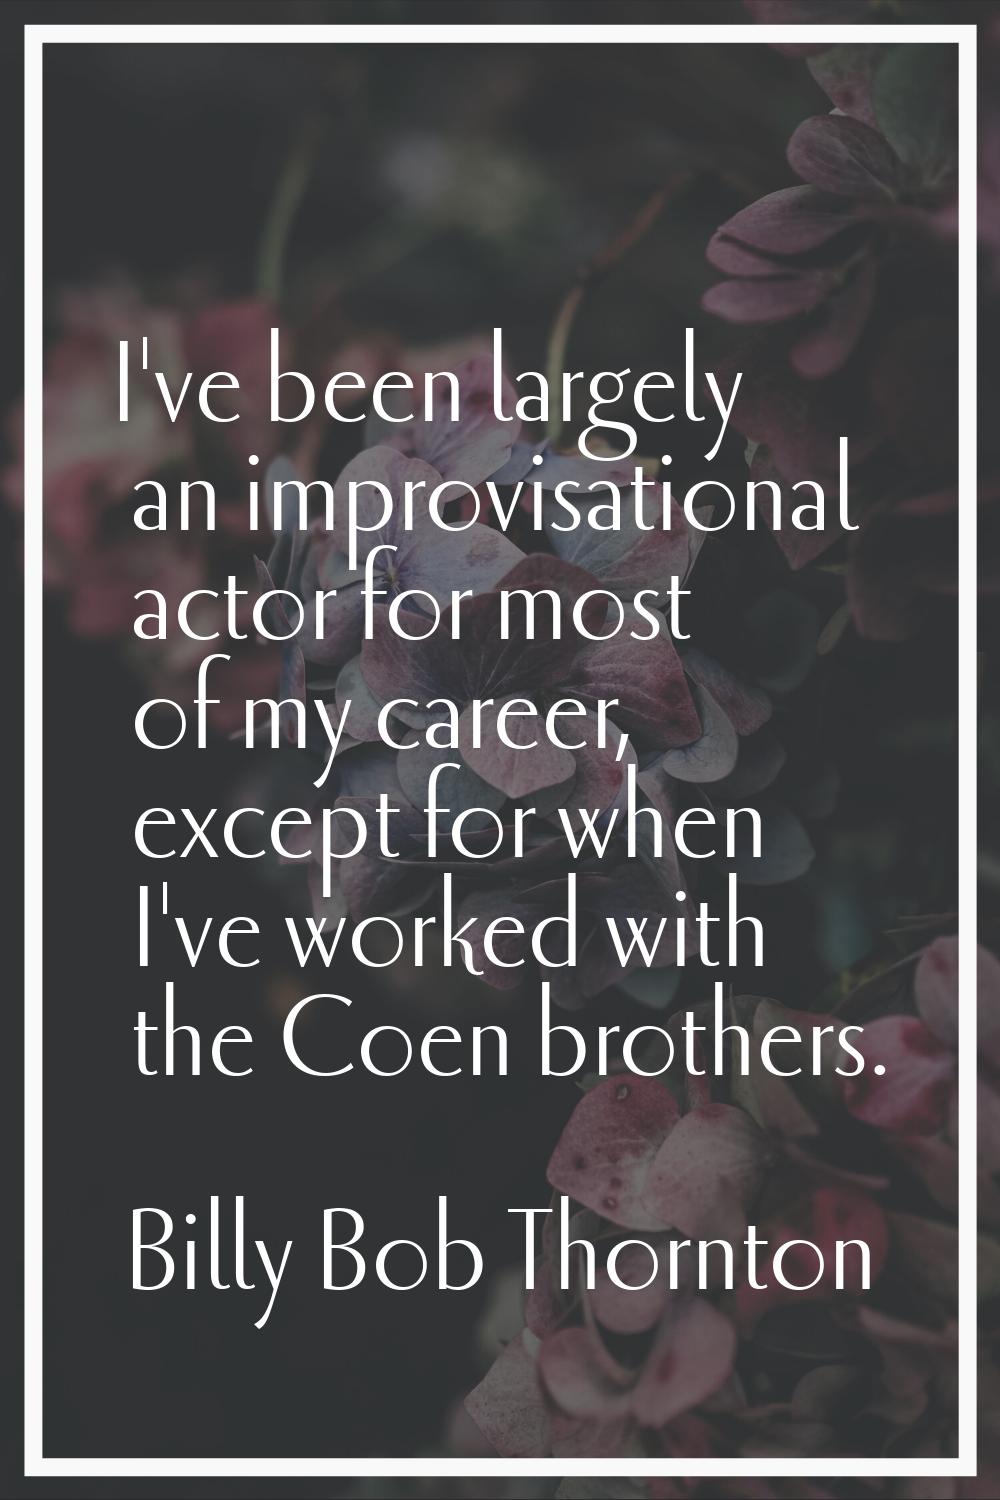 I've been largely an improvisational actor for most of my career, except for when I've worked with 